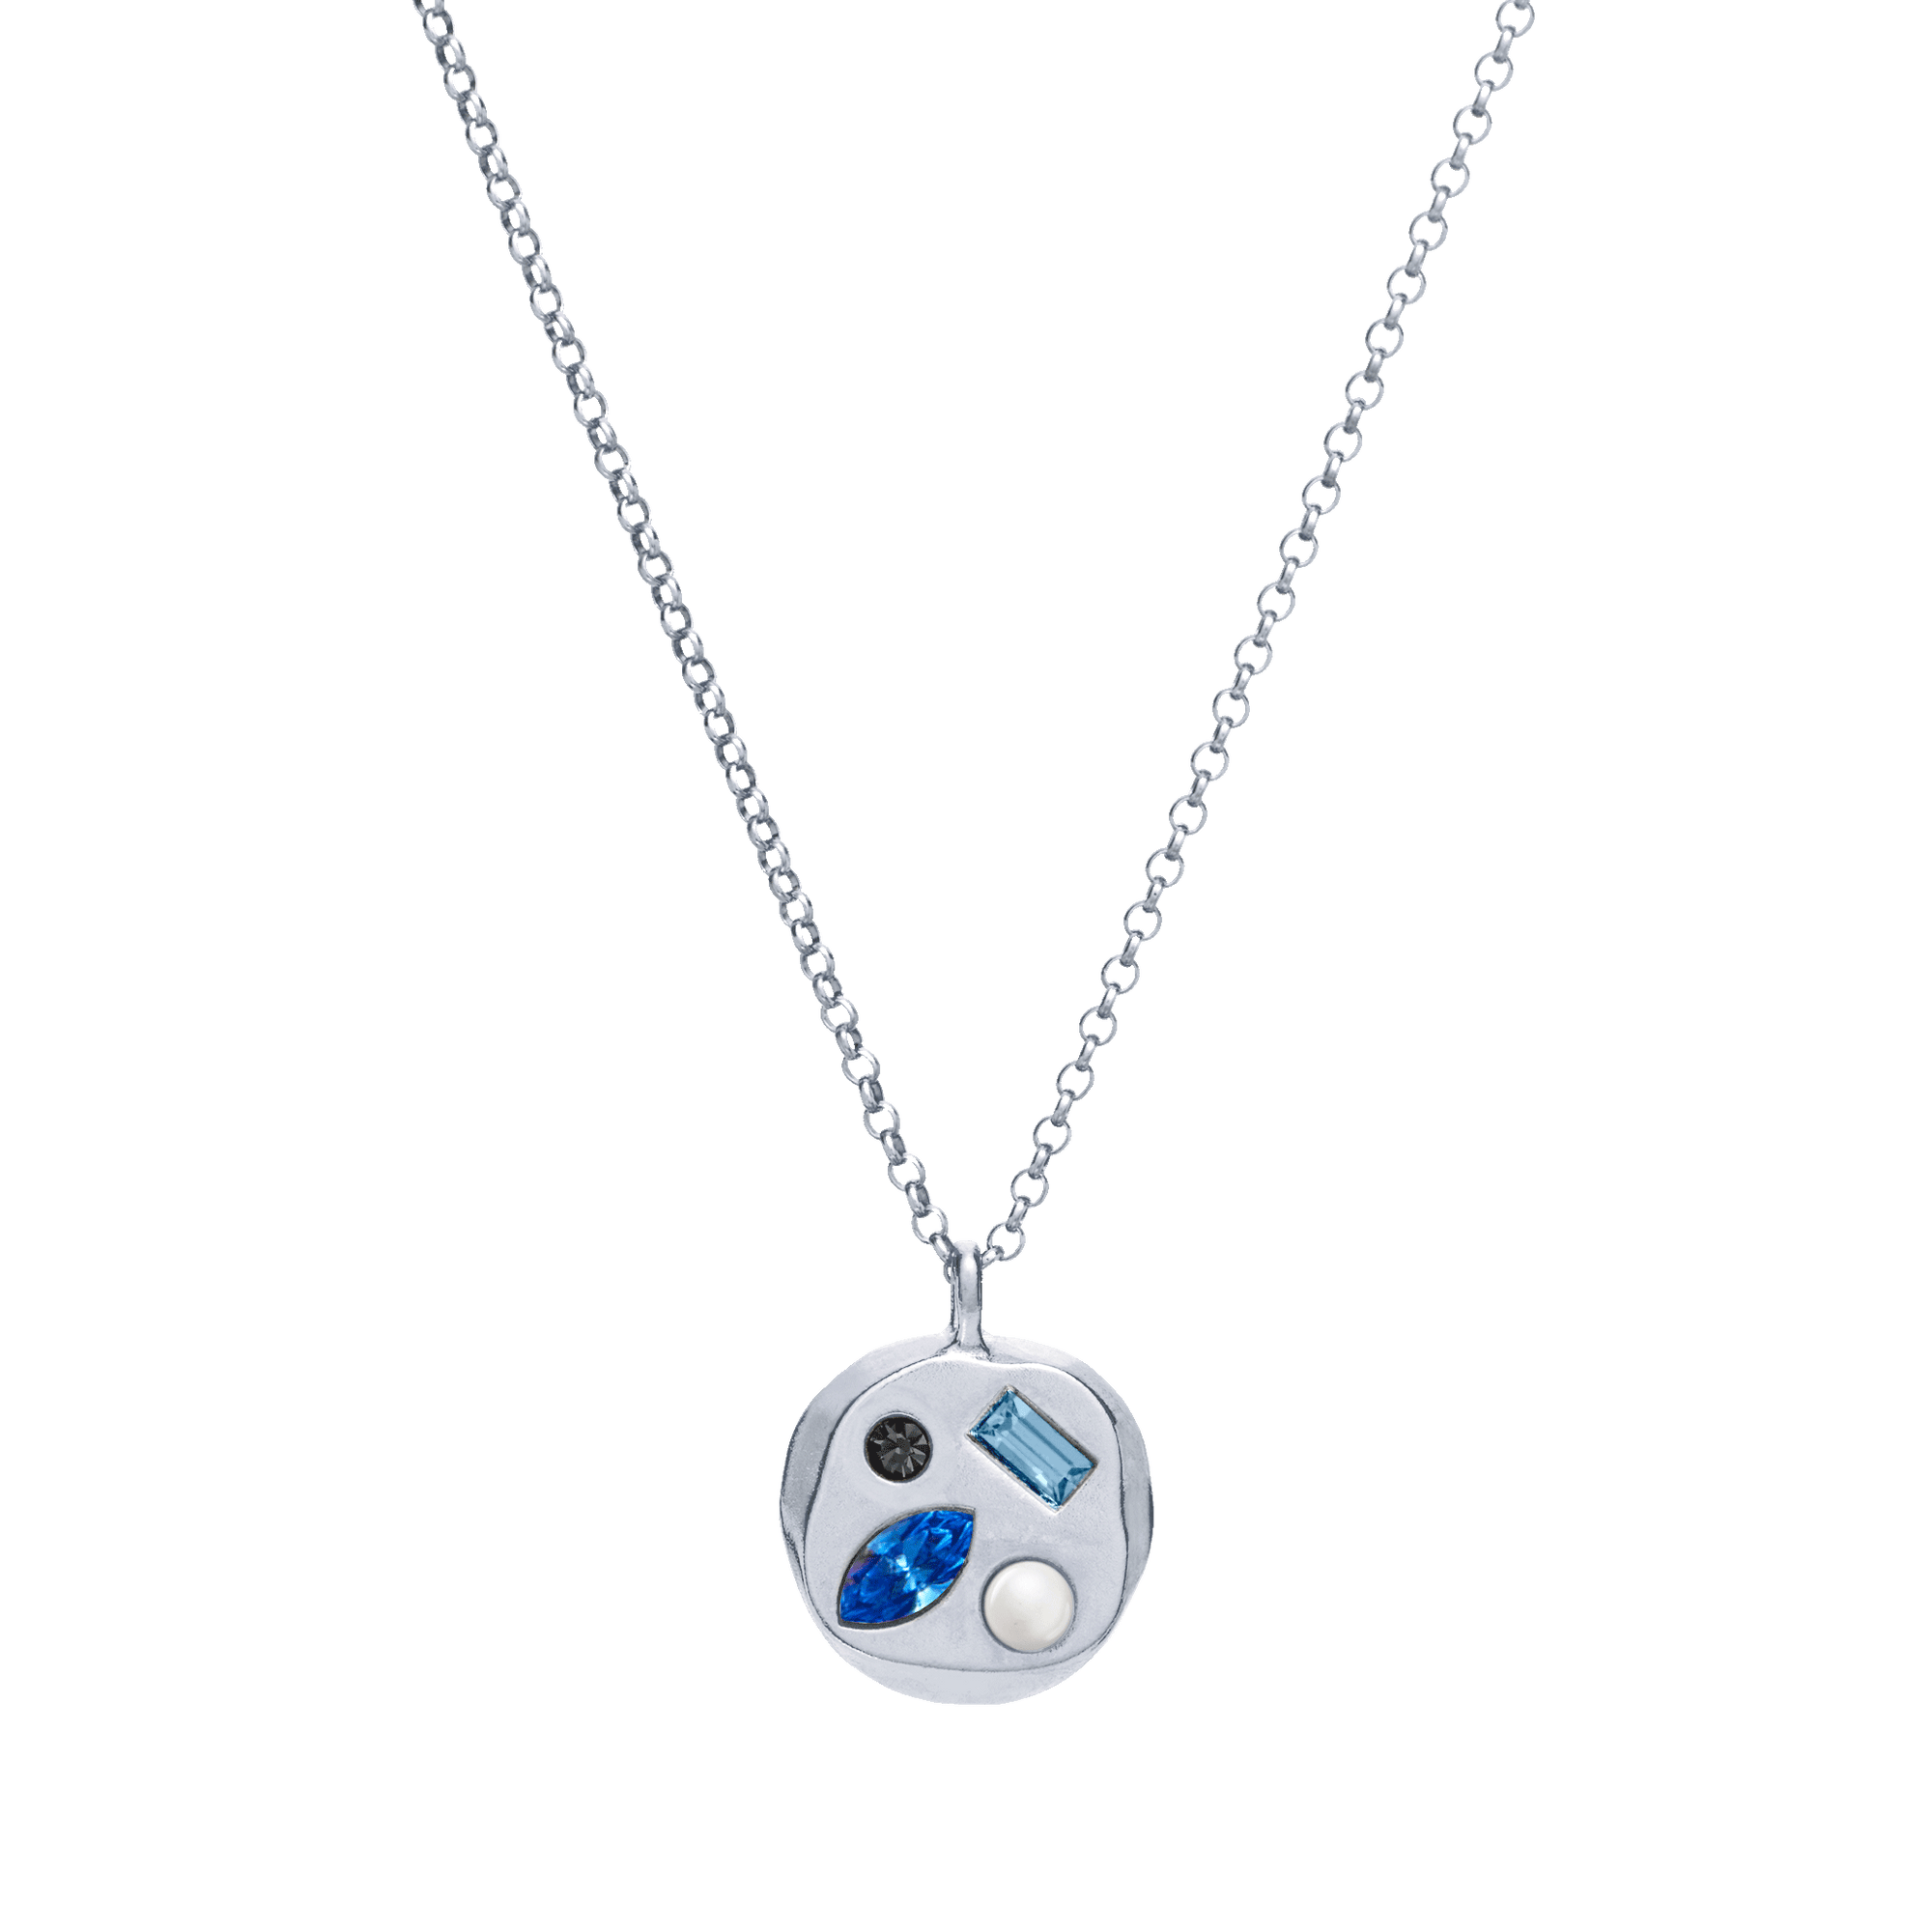 The September Thirtieth Pendant in Sterling Silver